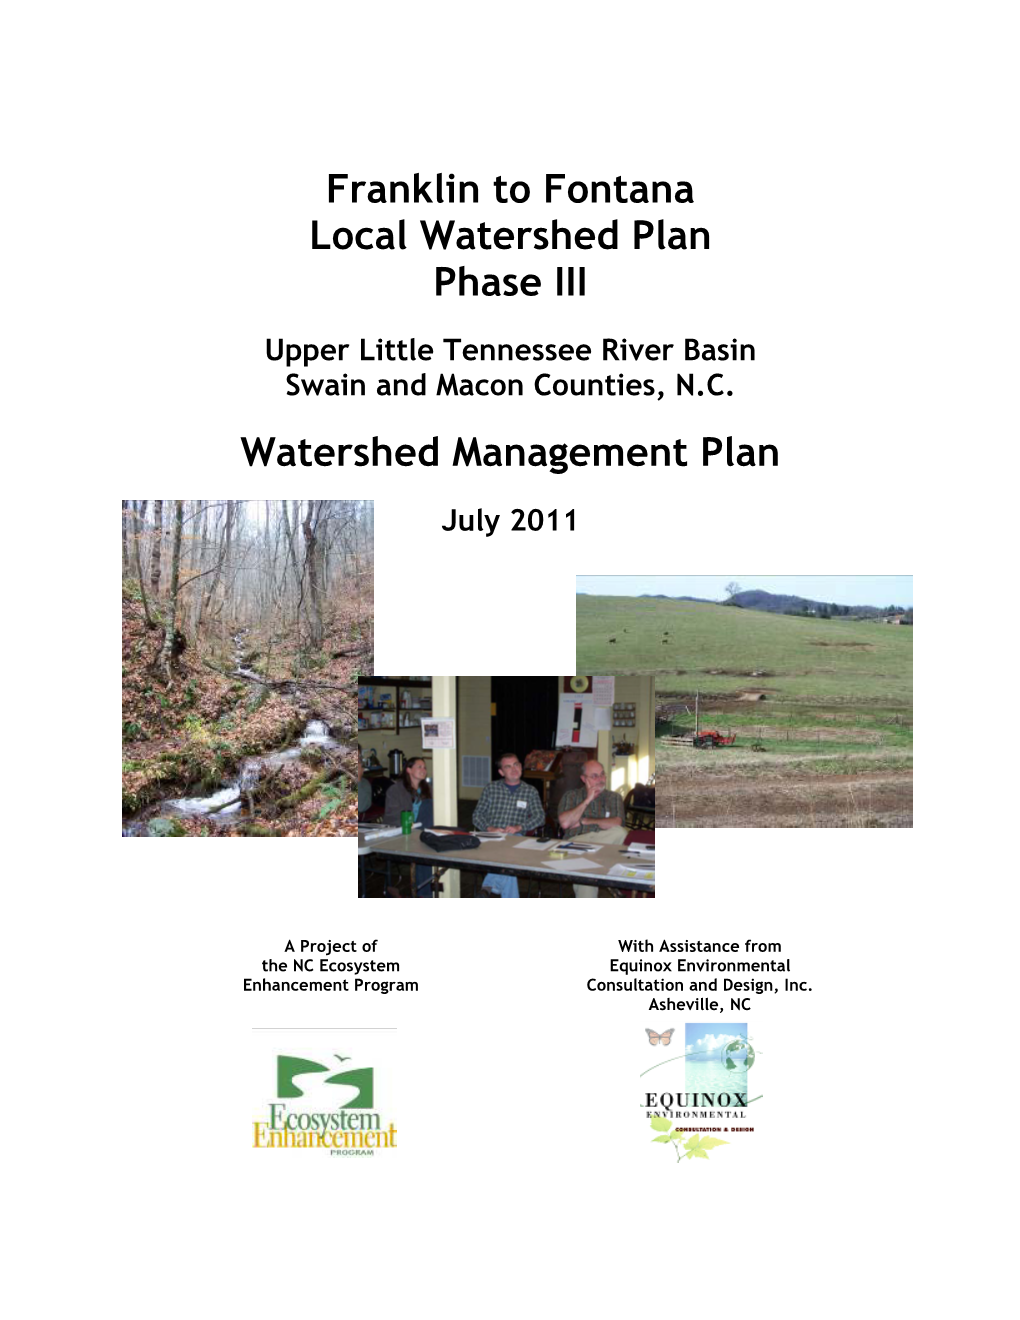 Franklin to Fontana Local Watershed Plan Phase III